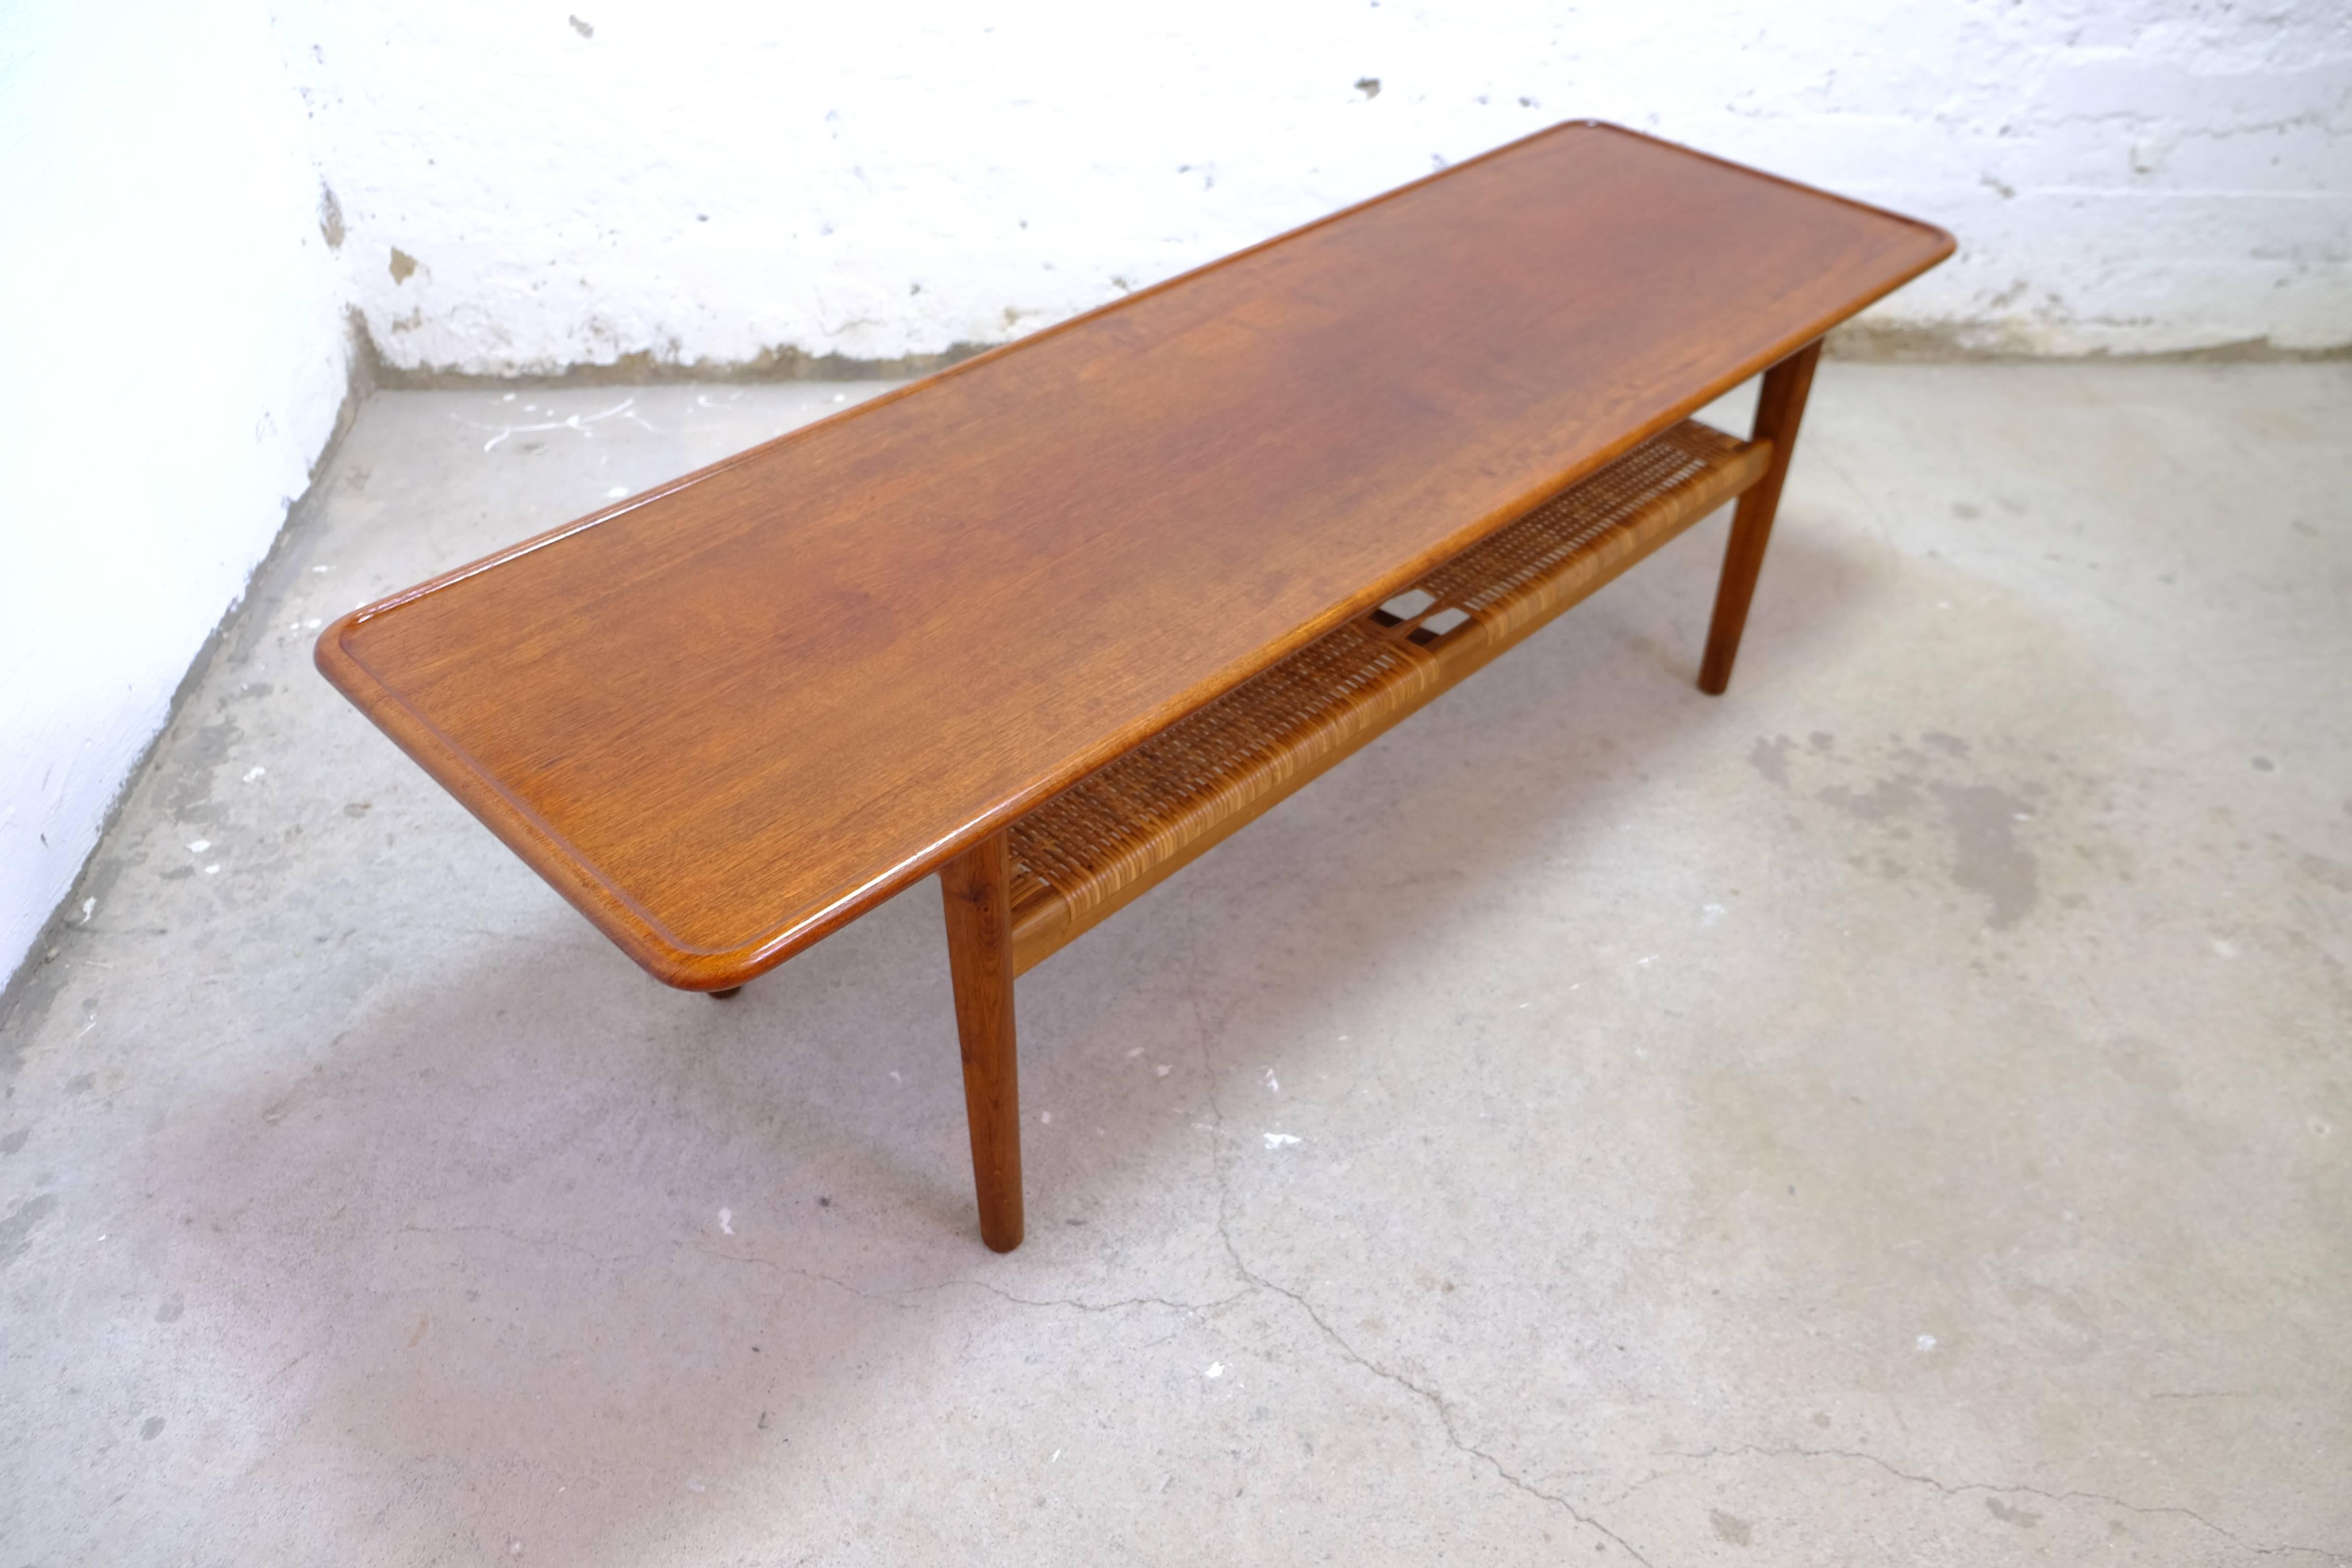 Coffee table model AT-10 design Hans J. Wegner.
Teak and cane, produced by Andreas Tuck in Denmark, 1950's.